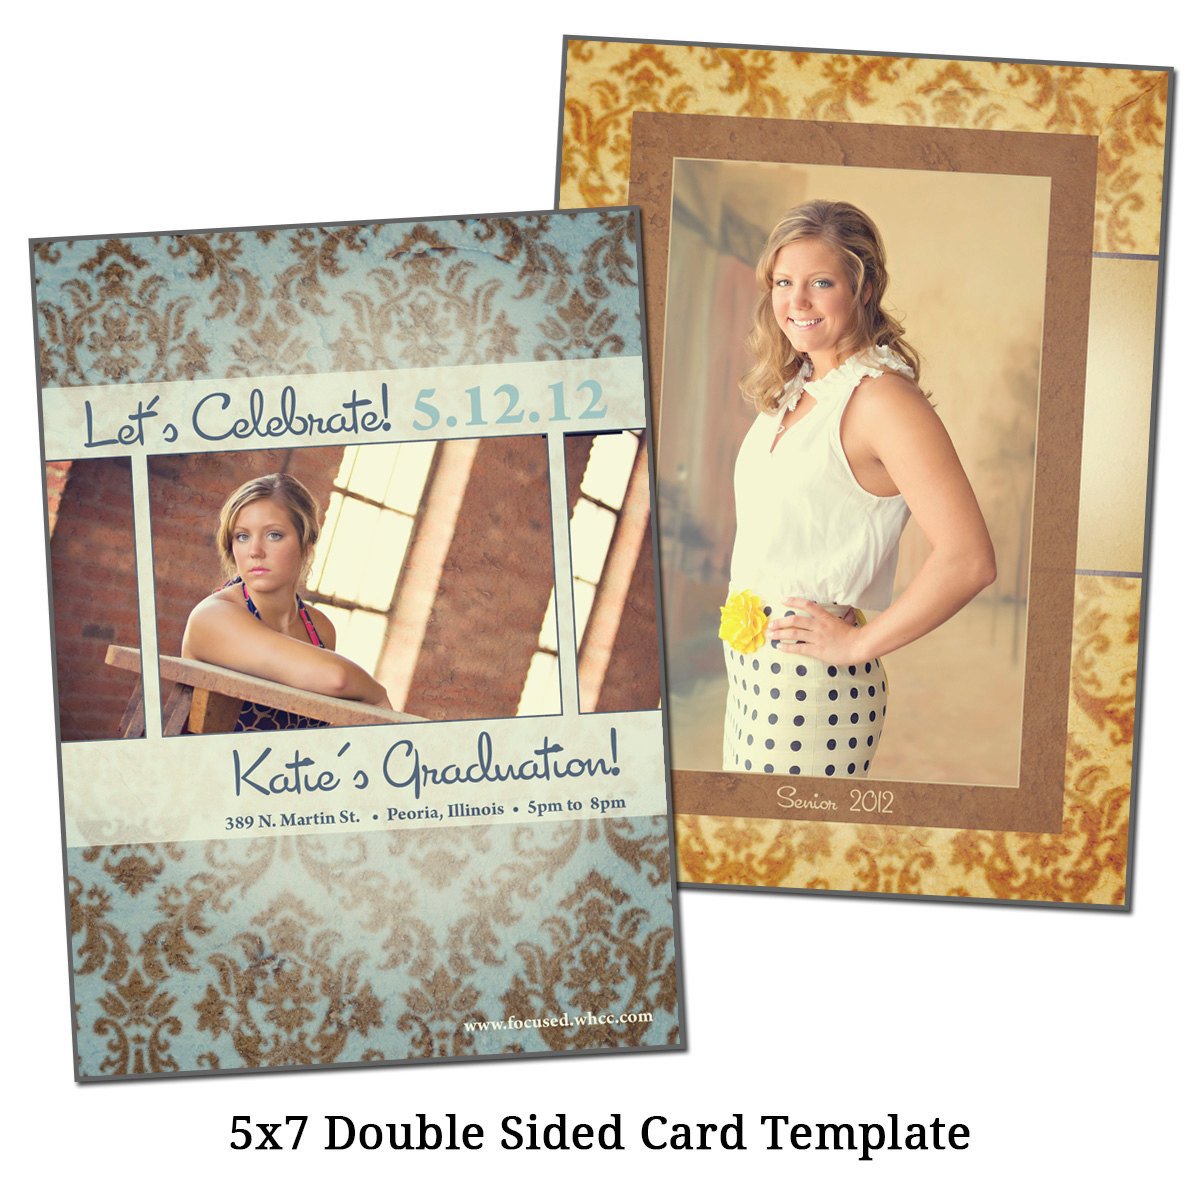 5x7 Double Sided Card Template SENIOR DAMASK by